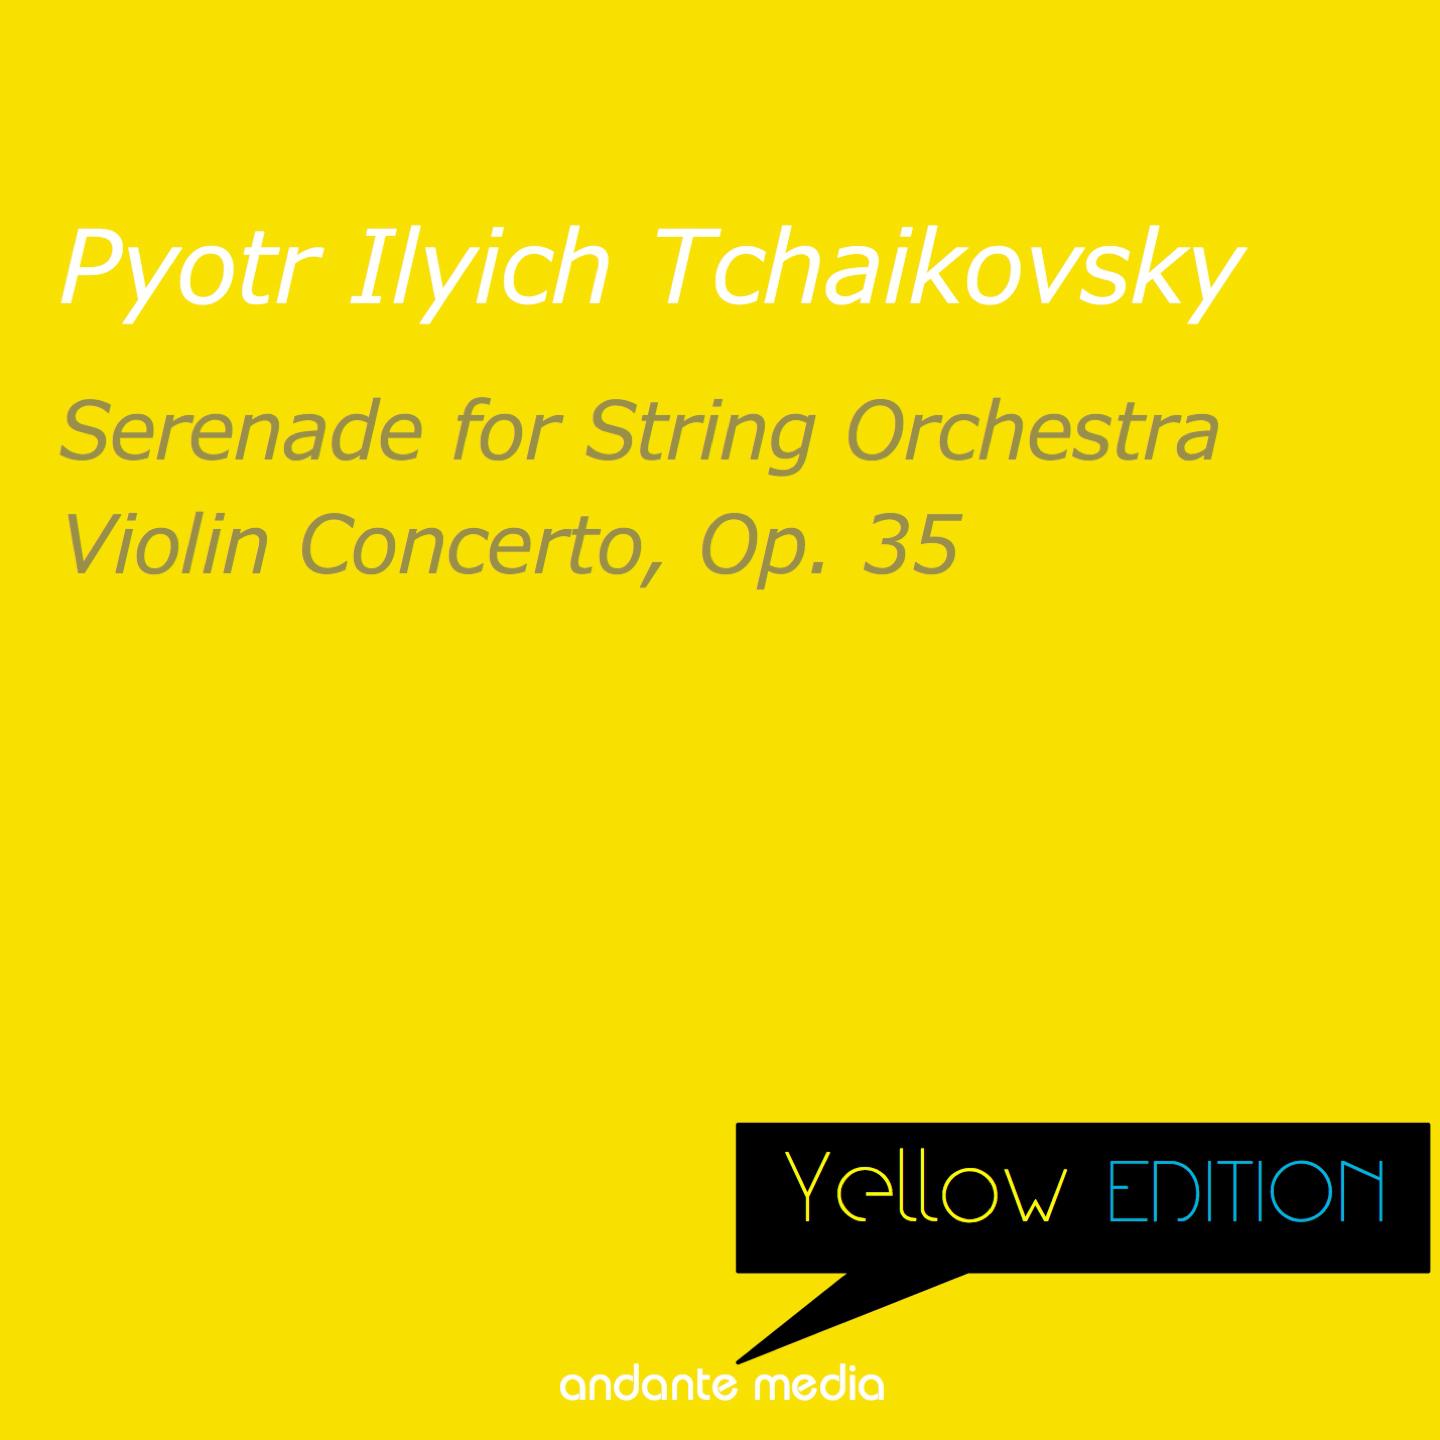 Yellow Edition - Tchaikovsky: Serenade for String Orchestra & Violin Concerto, Op. 35